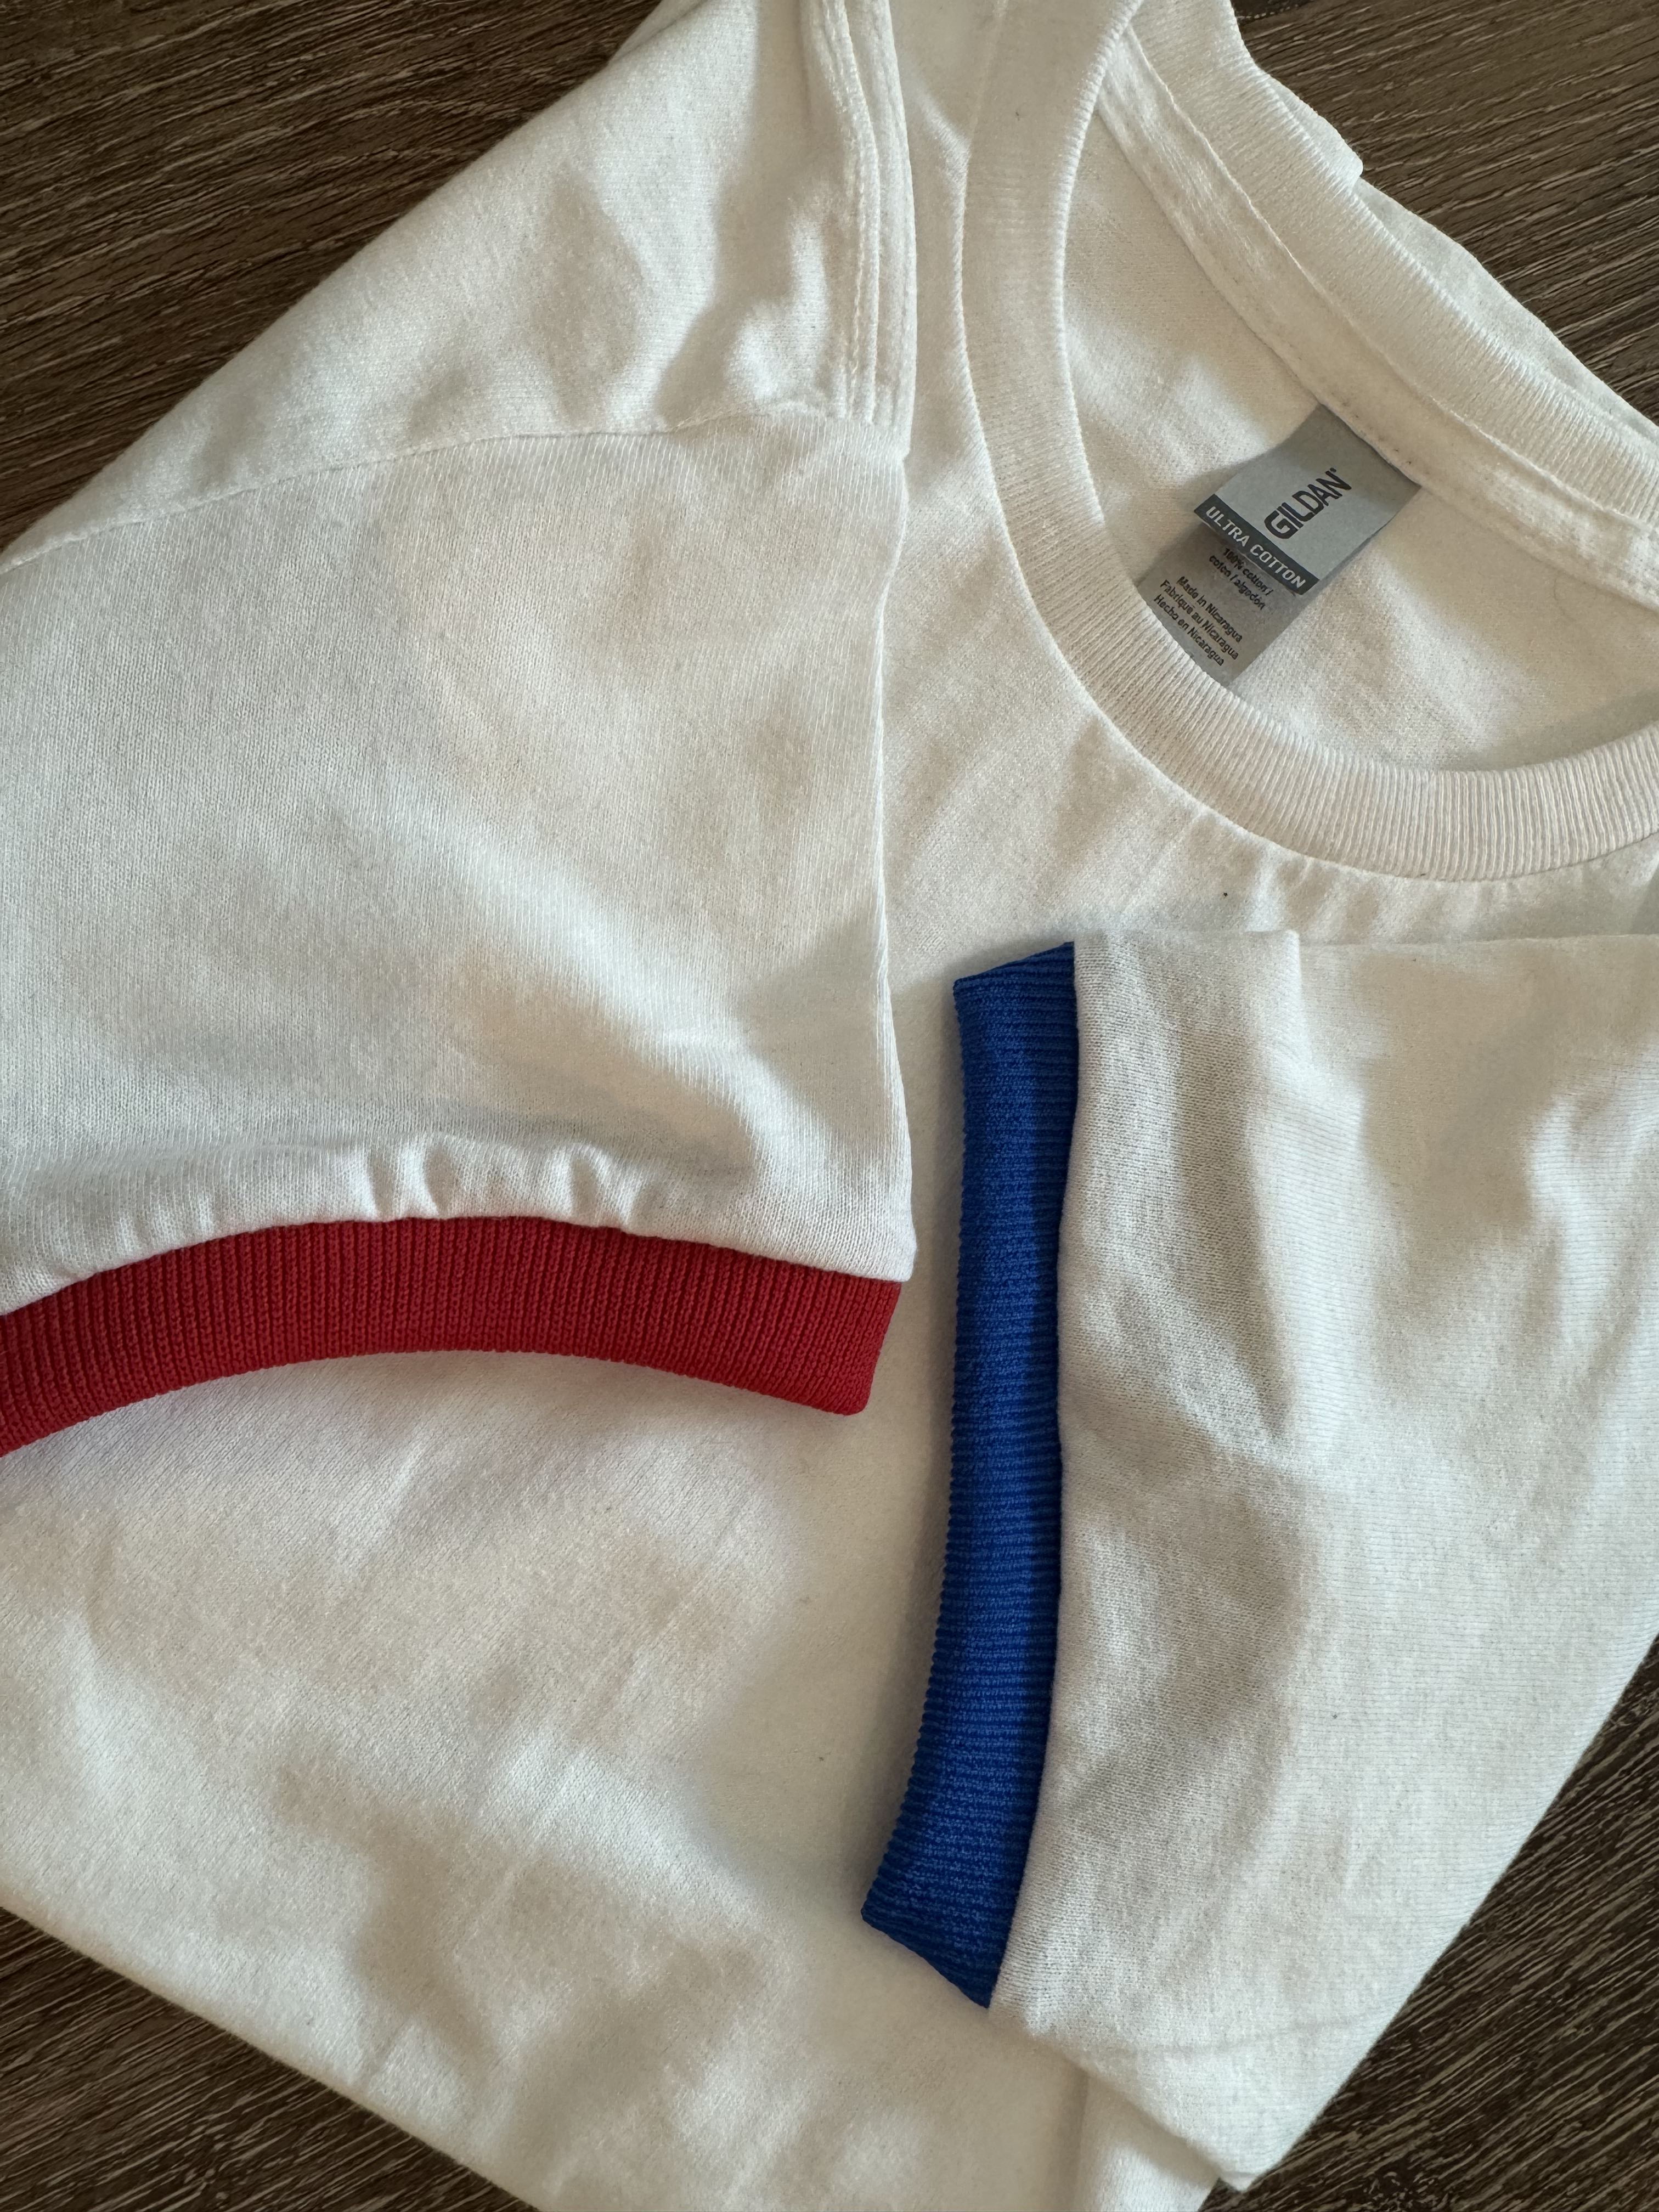 Sample image of Men's White Cotton T-Shirt w/ Red & Blue Cuffs